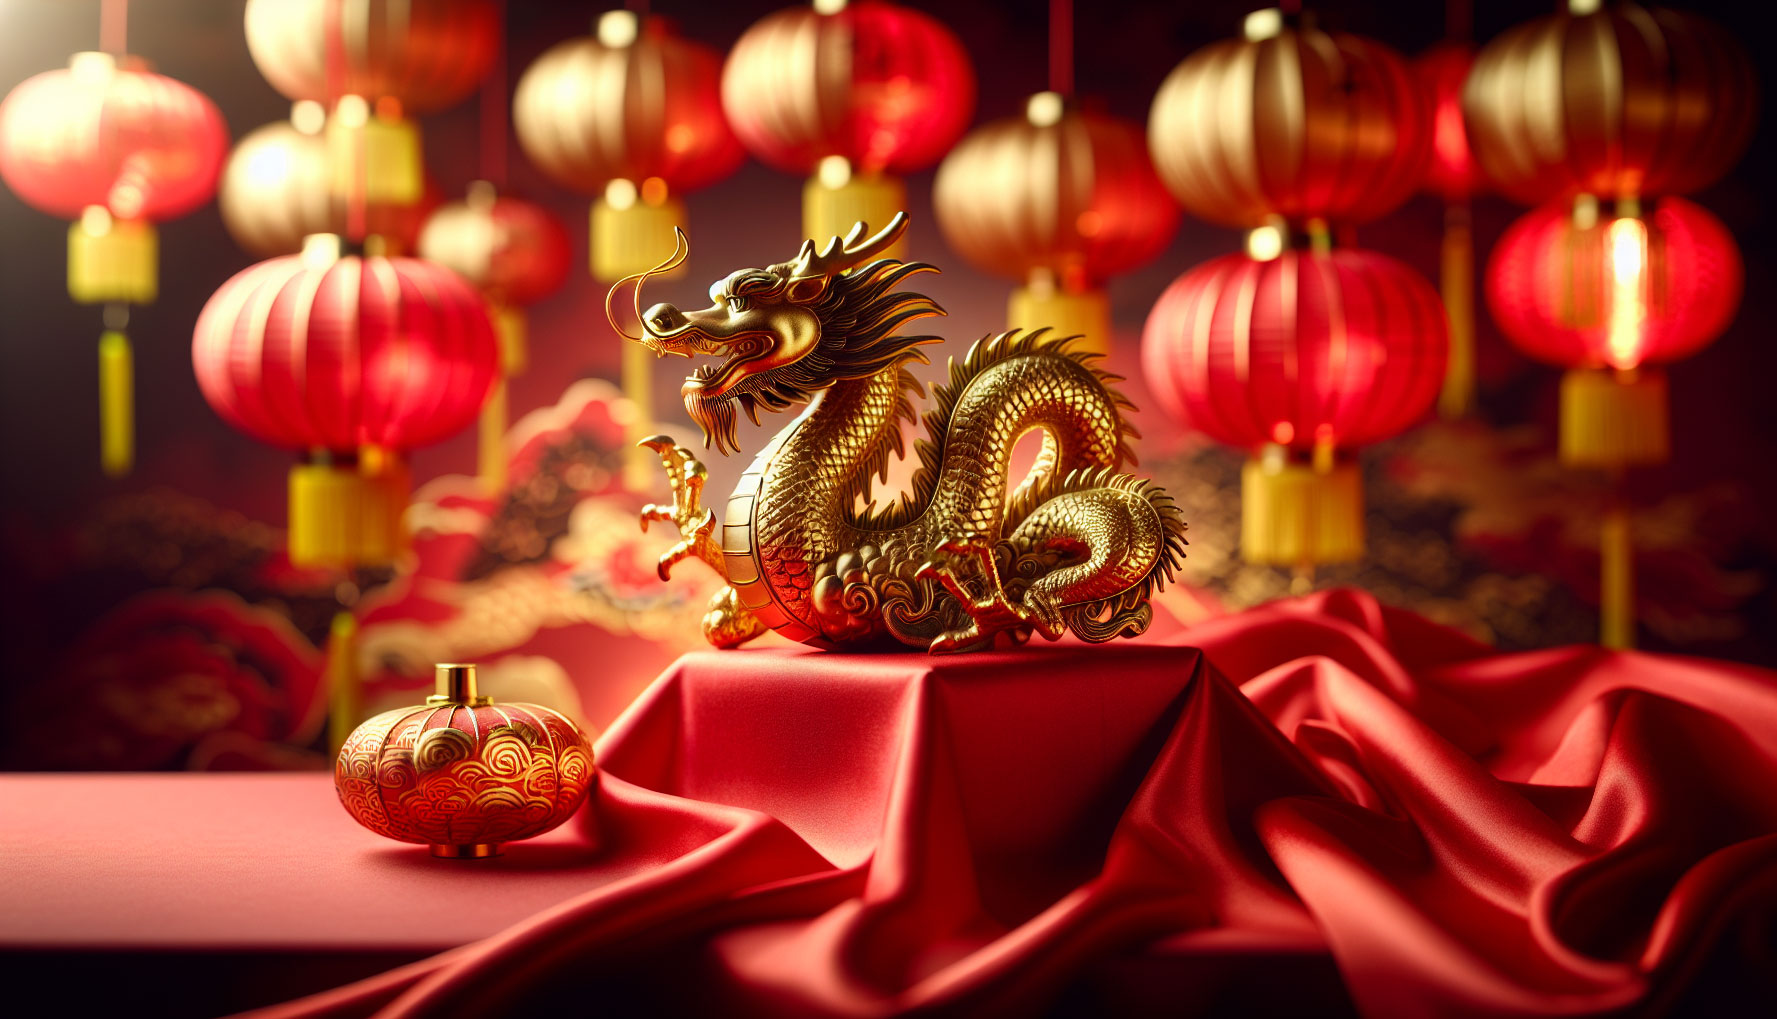 What are the auspicious or lucky aspects of the Year of the Dragon in 2024?